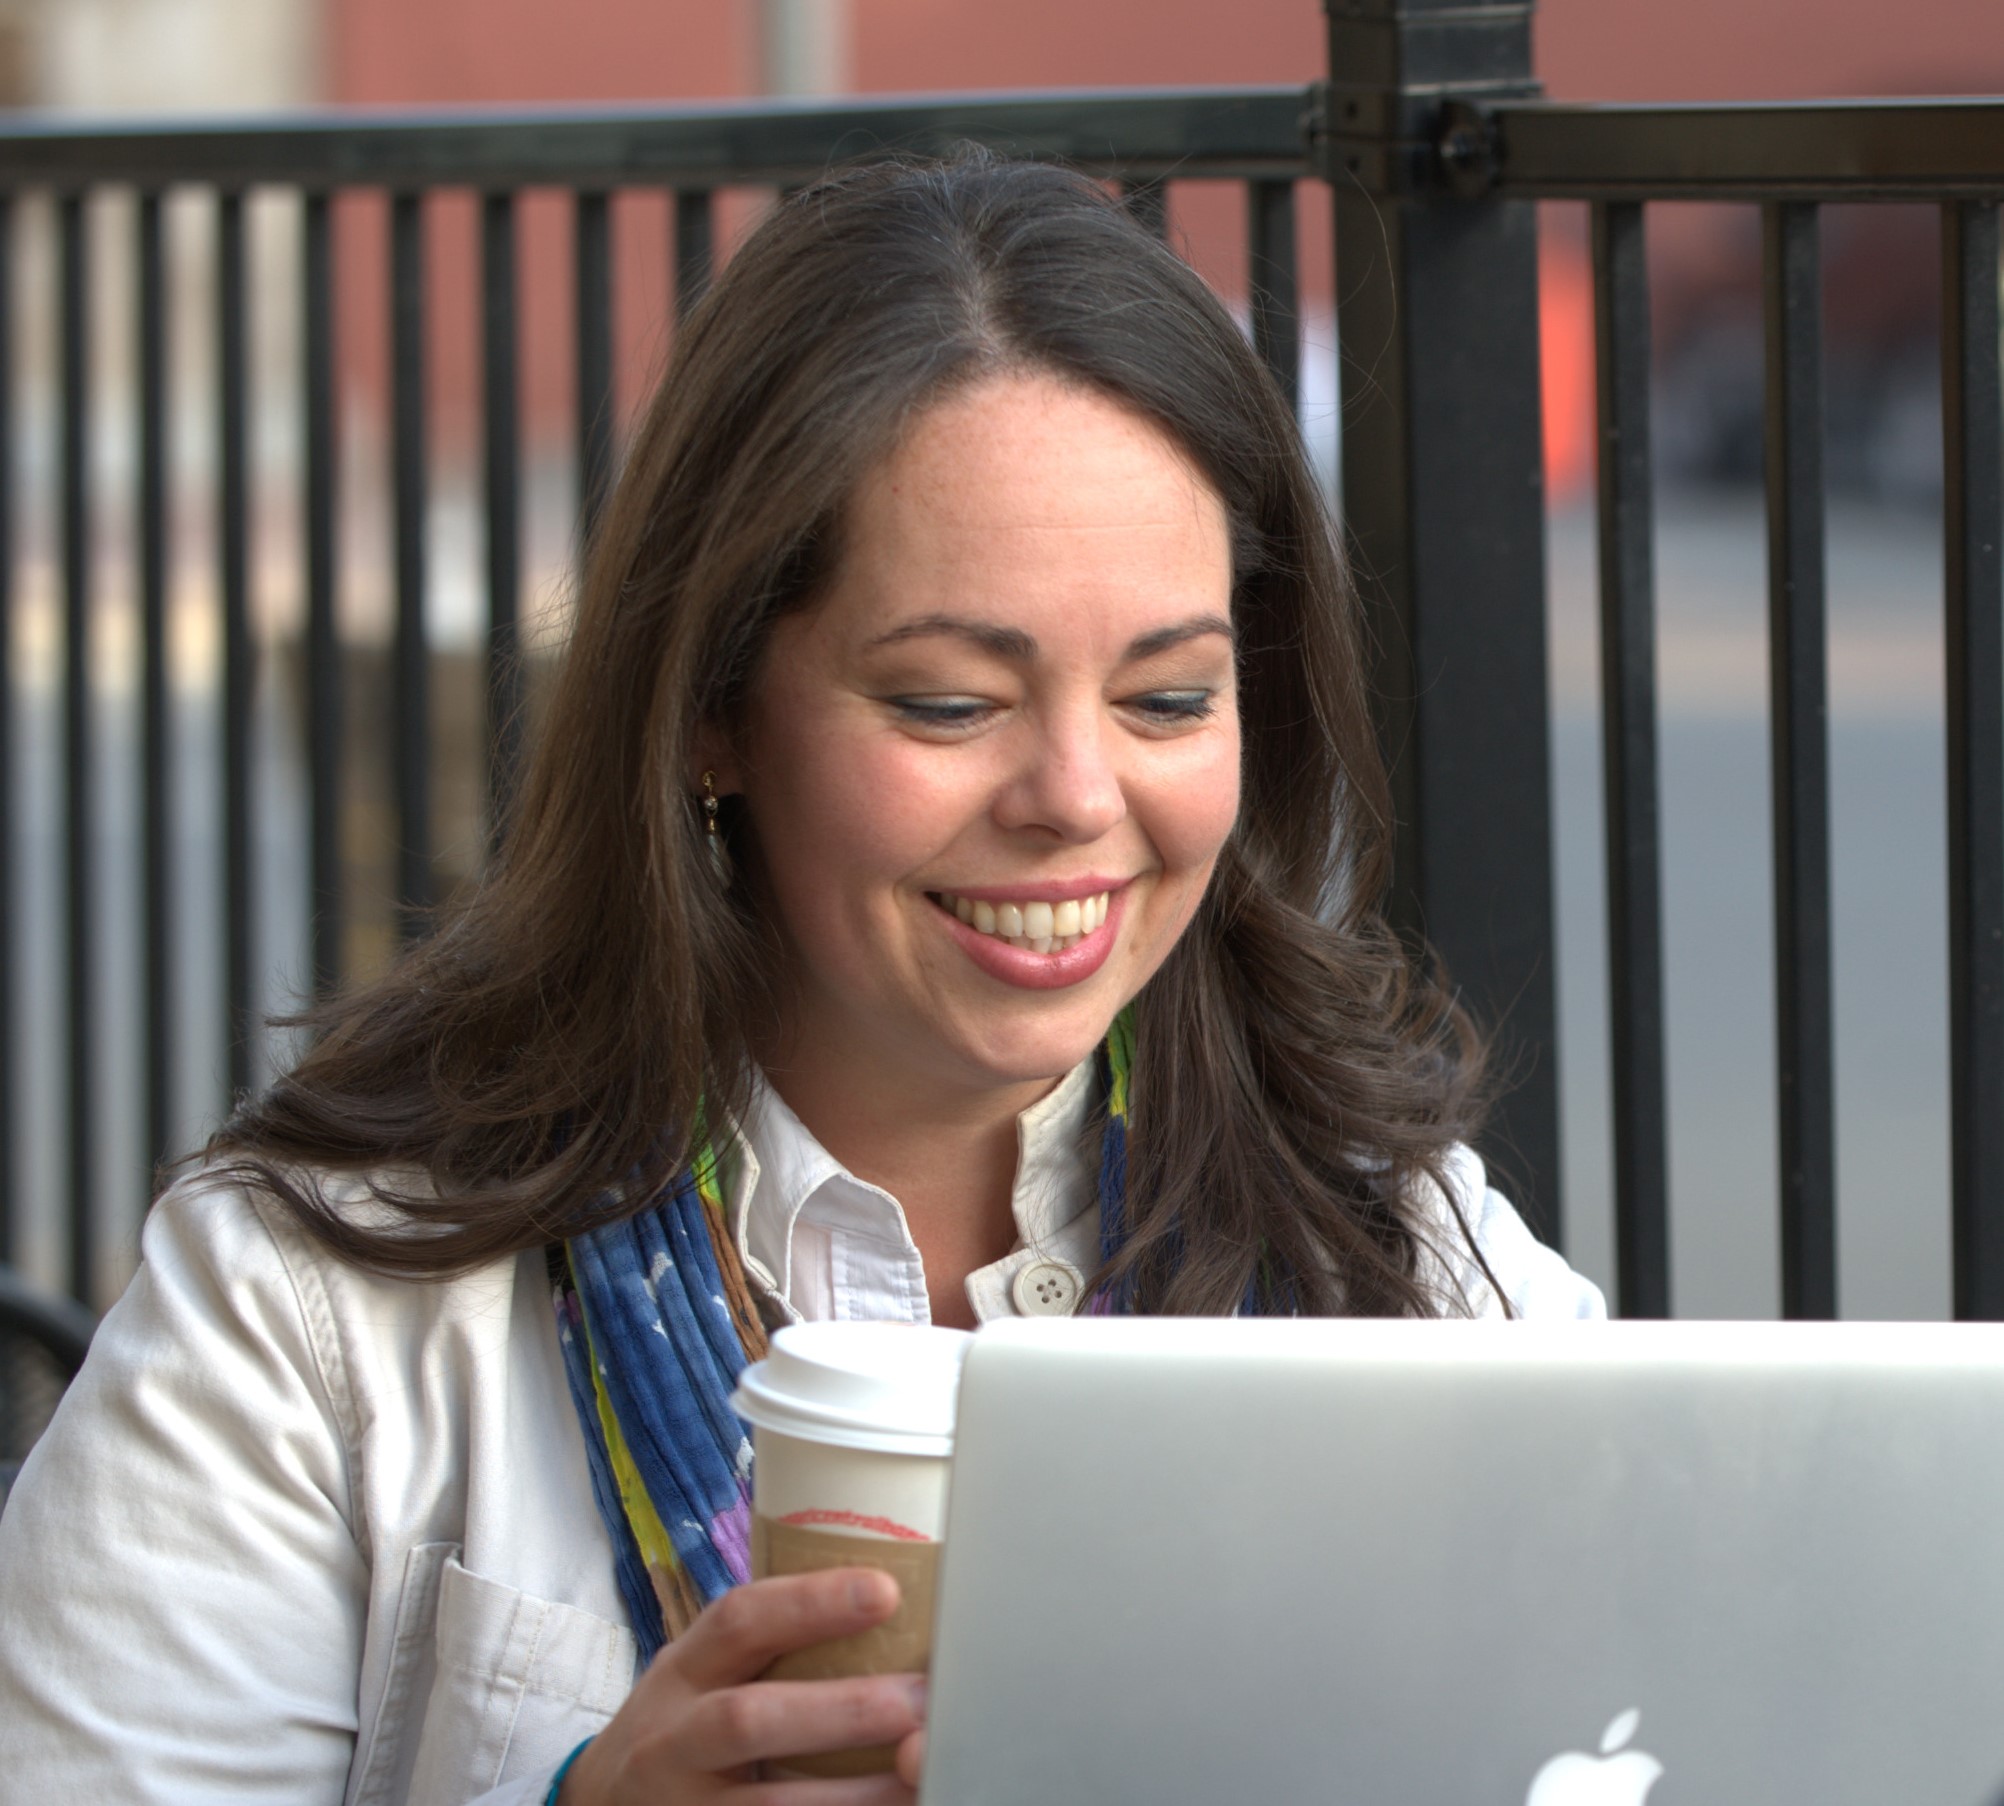 woman smiling while working on a laptop and holding a cup of coffee